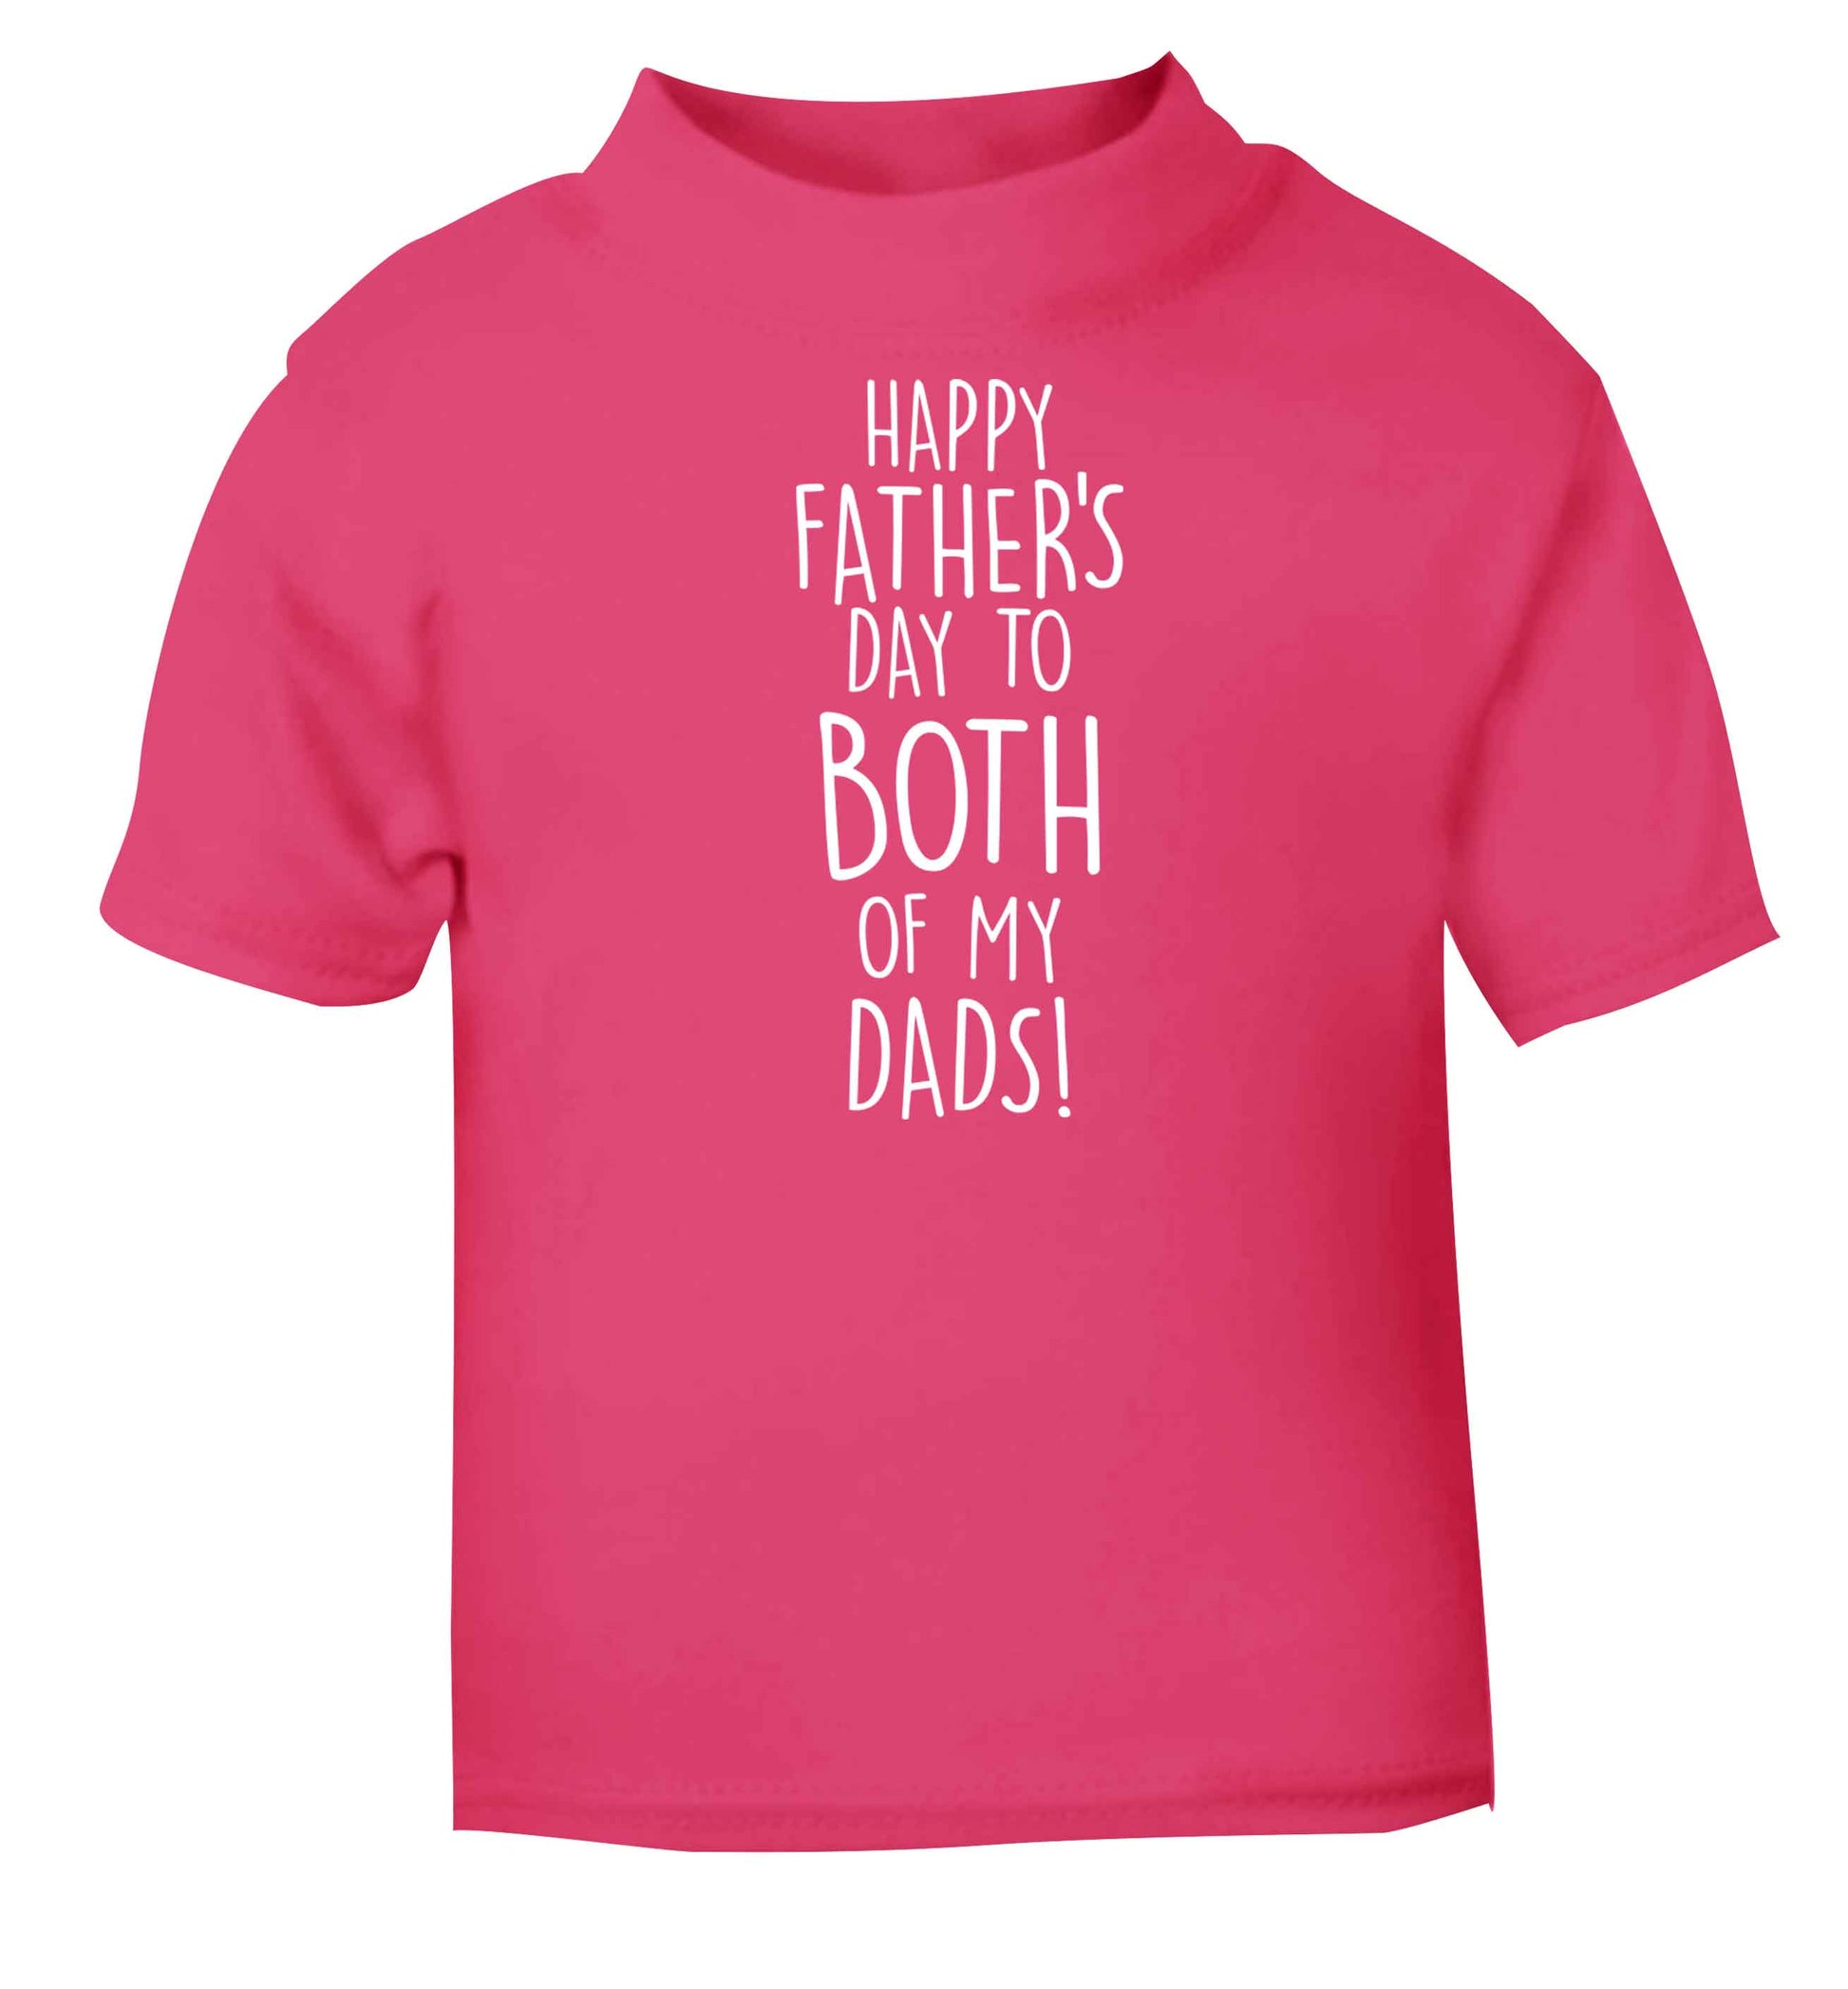 Happy Father's day to both of my dads pink baby toddler Tshirt 2 Years